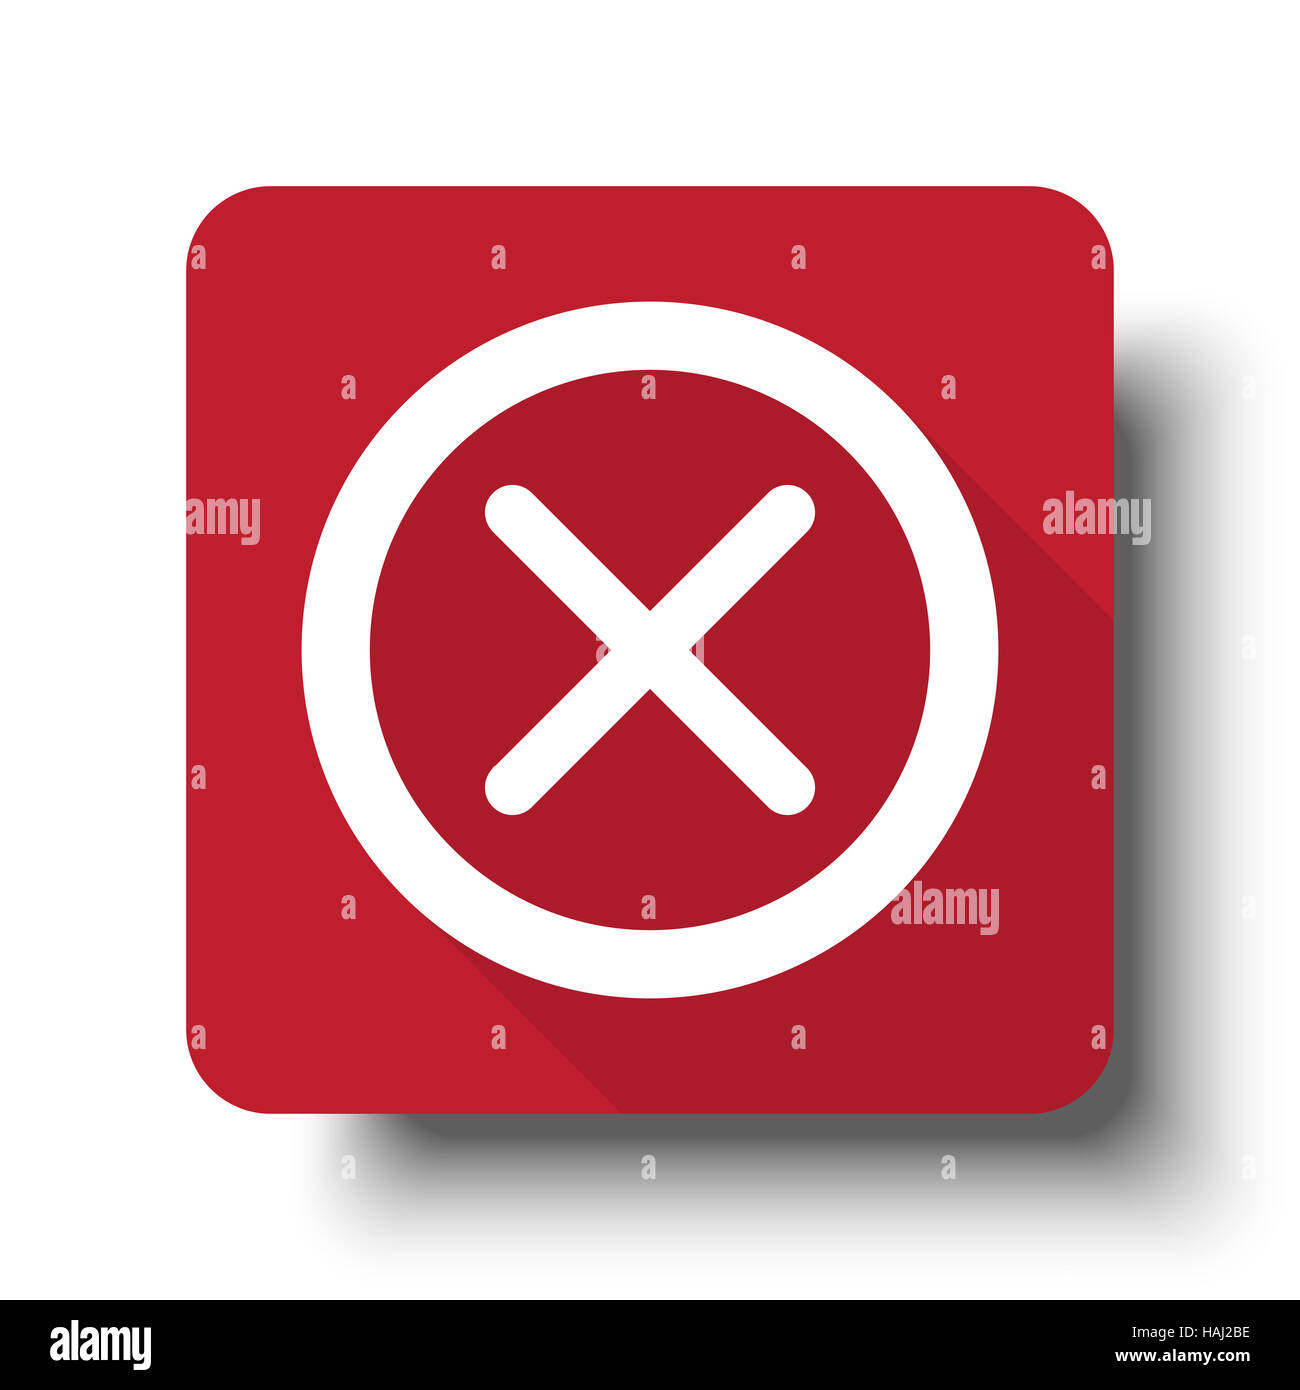 Flat Cancel web icon on red button with drop shadow Stock Photo